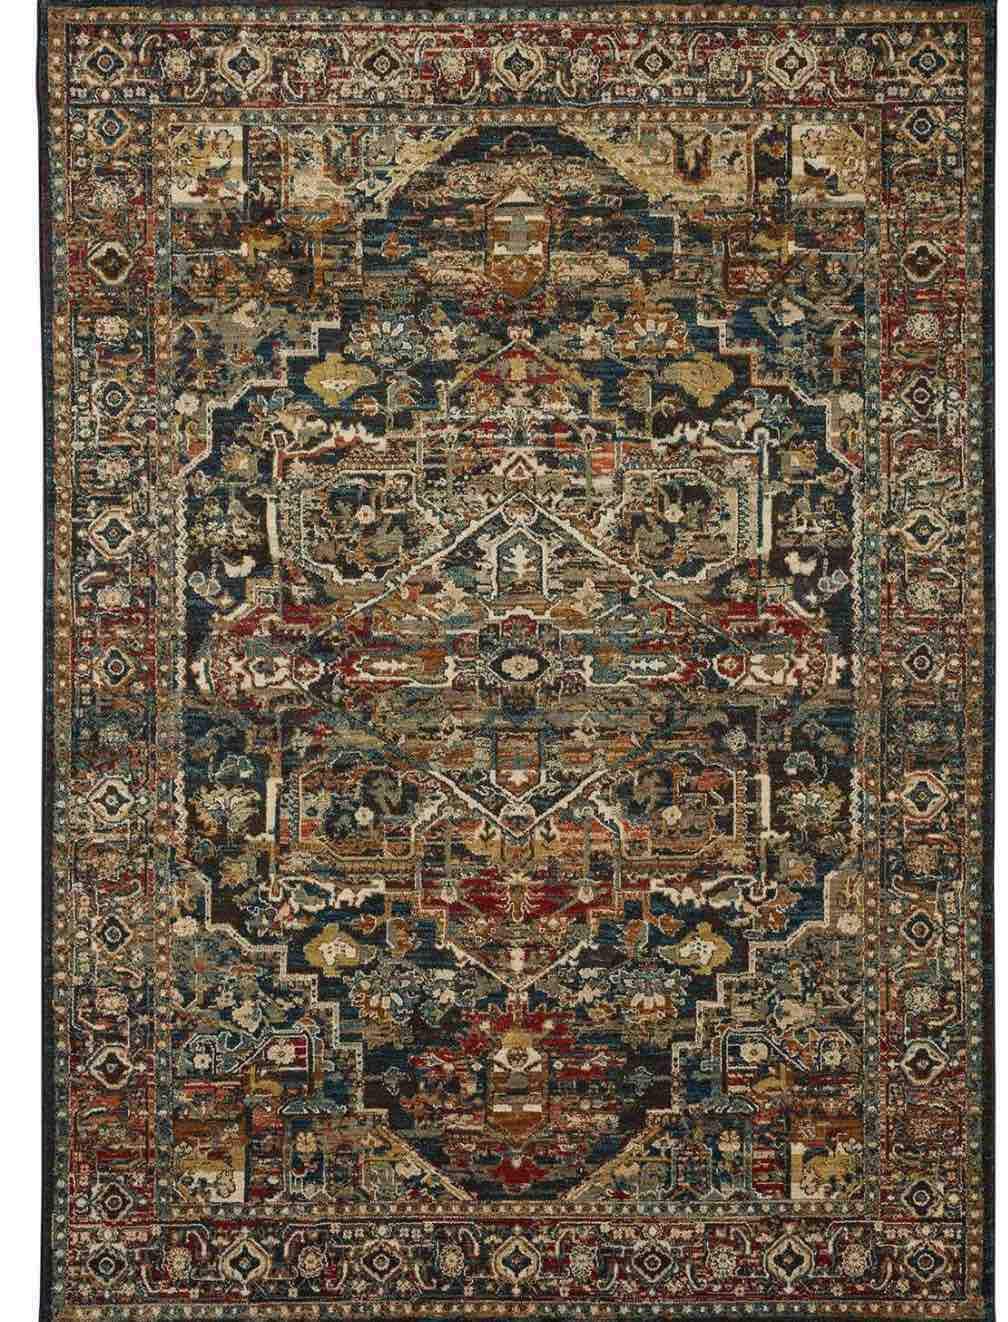 Pet Friendly Spice Market Alcantara Sapphire Rug karastan rugs online good for pets dogs cats affordable traditional area rug